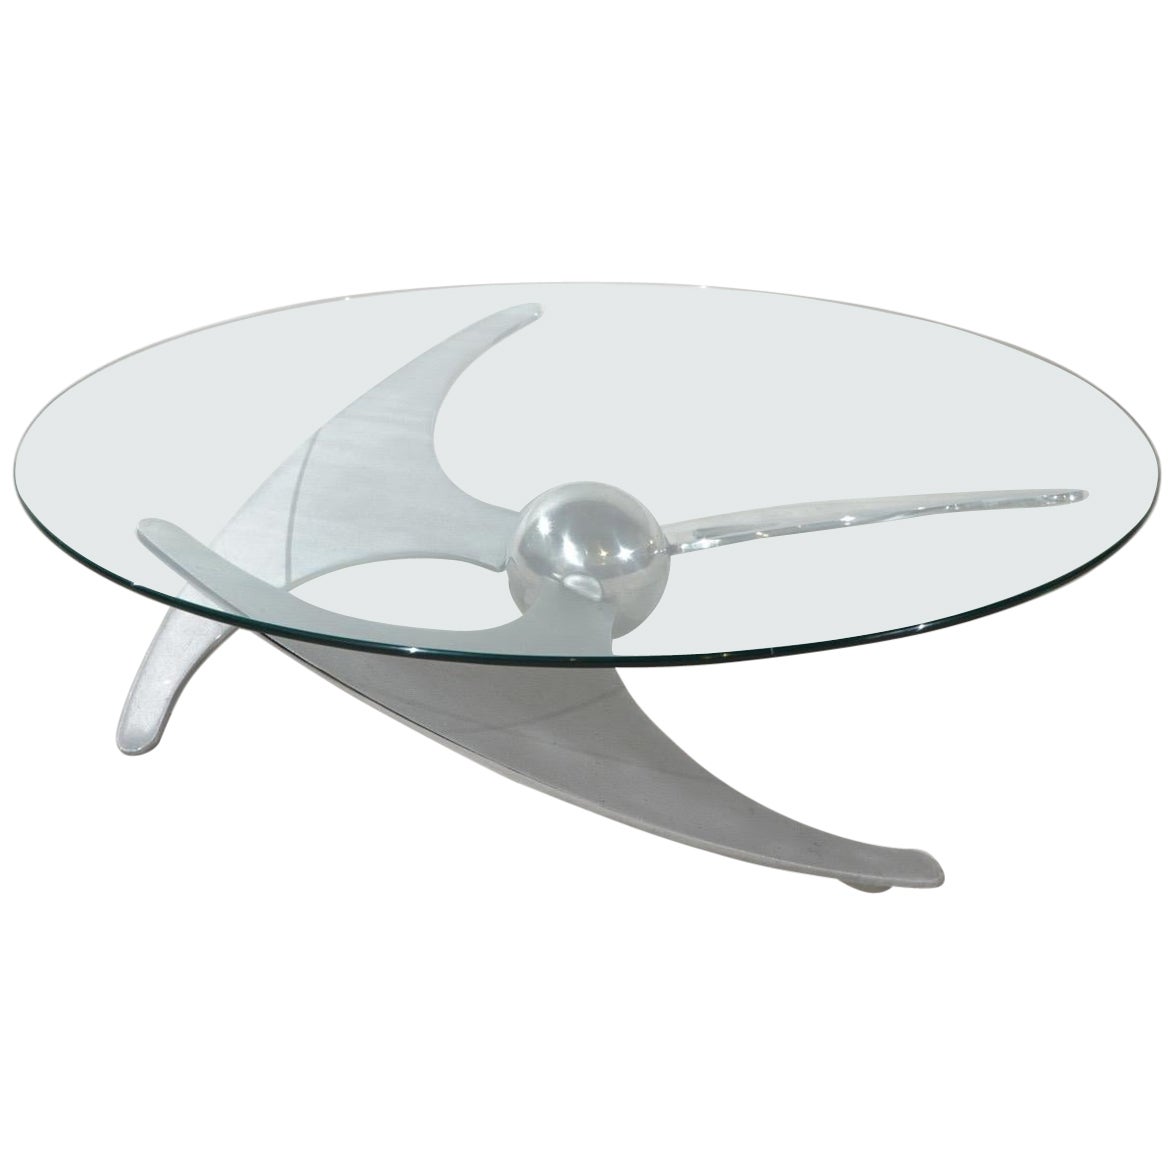 Space Age Adjustable Coffee Table/ Dining Table Luciano Campanini Propeller Glas